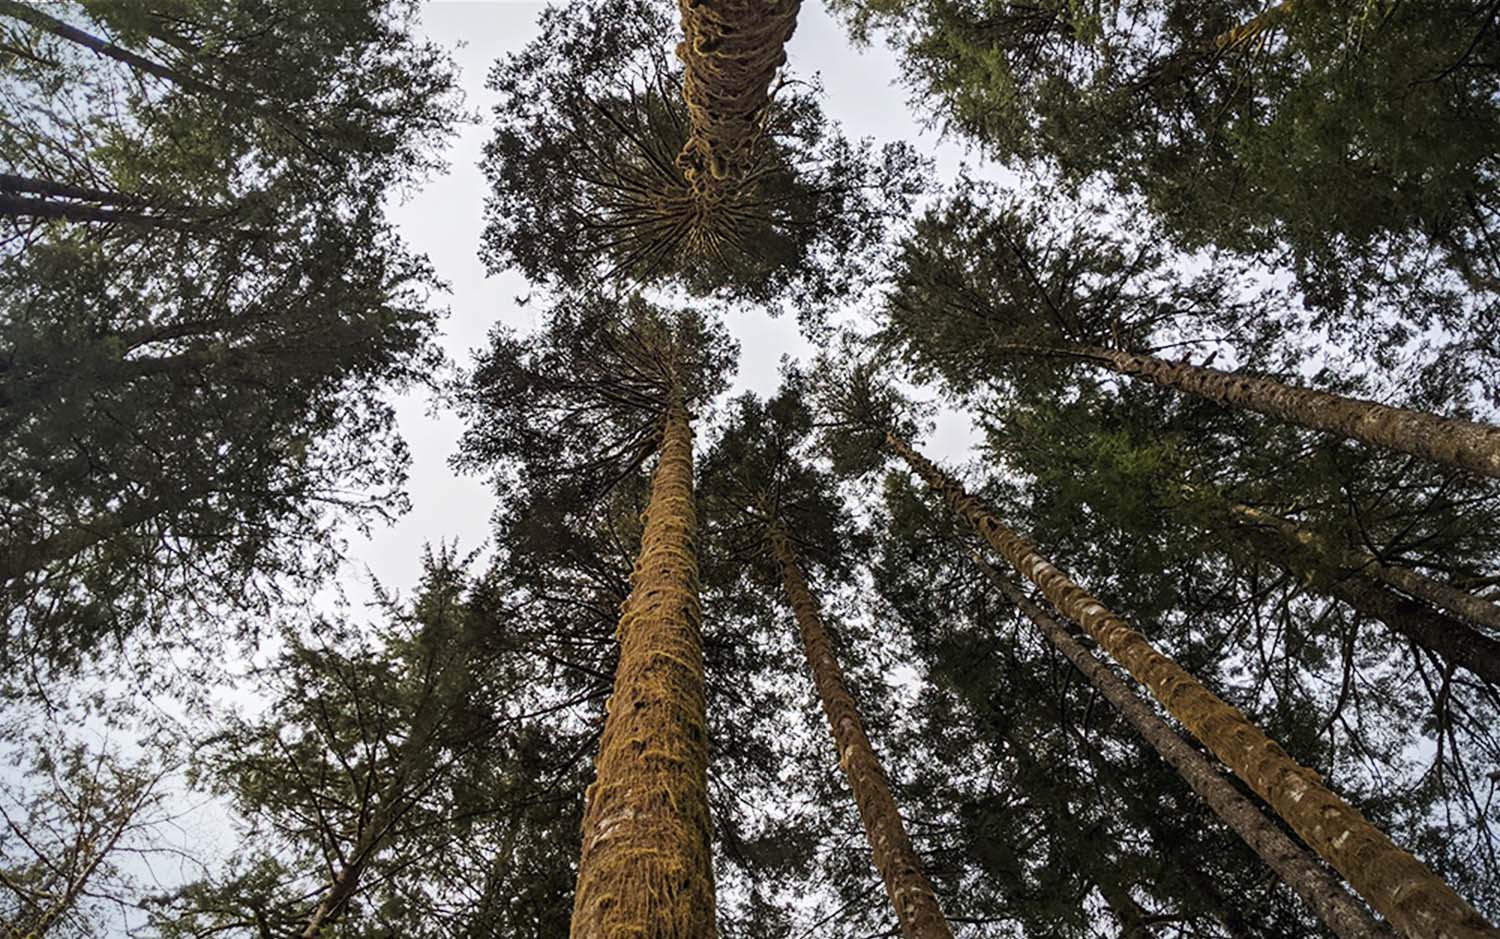 A view from the ground looking up at tall trees